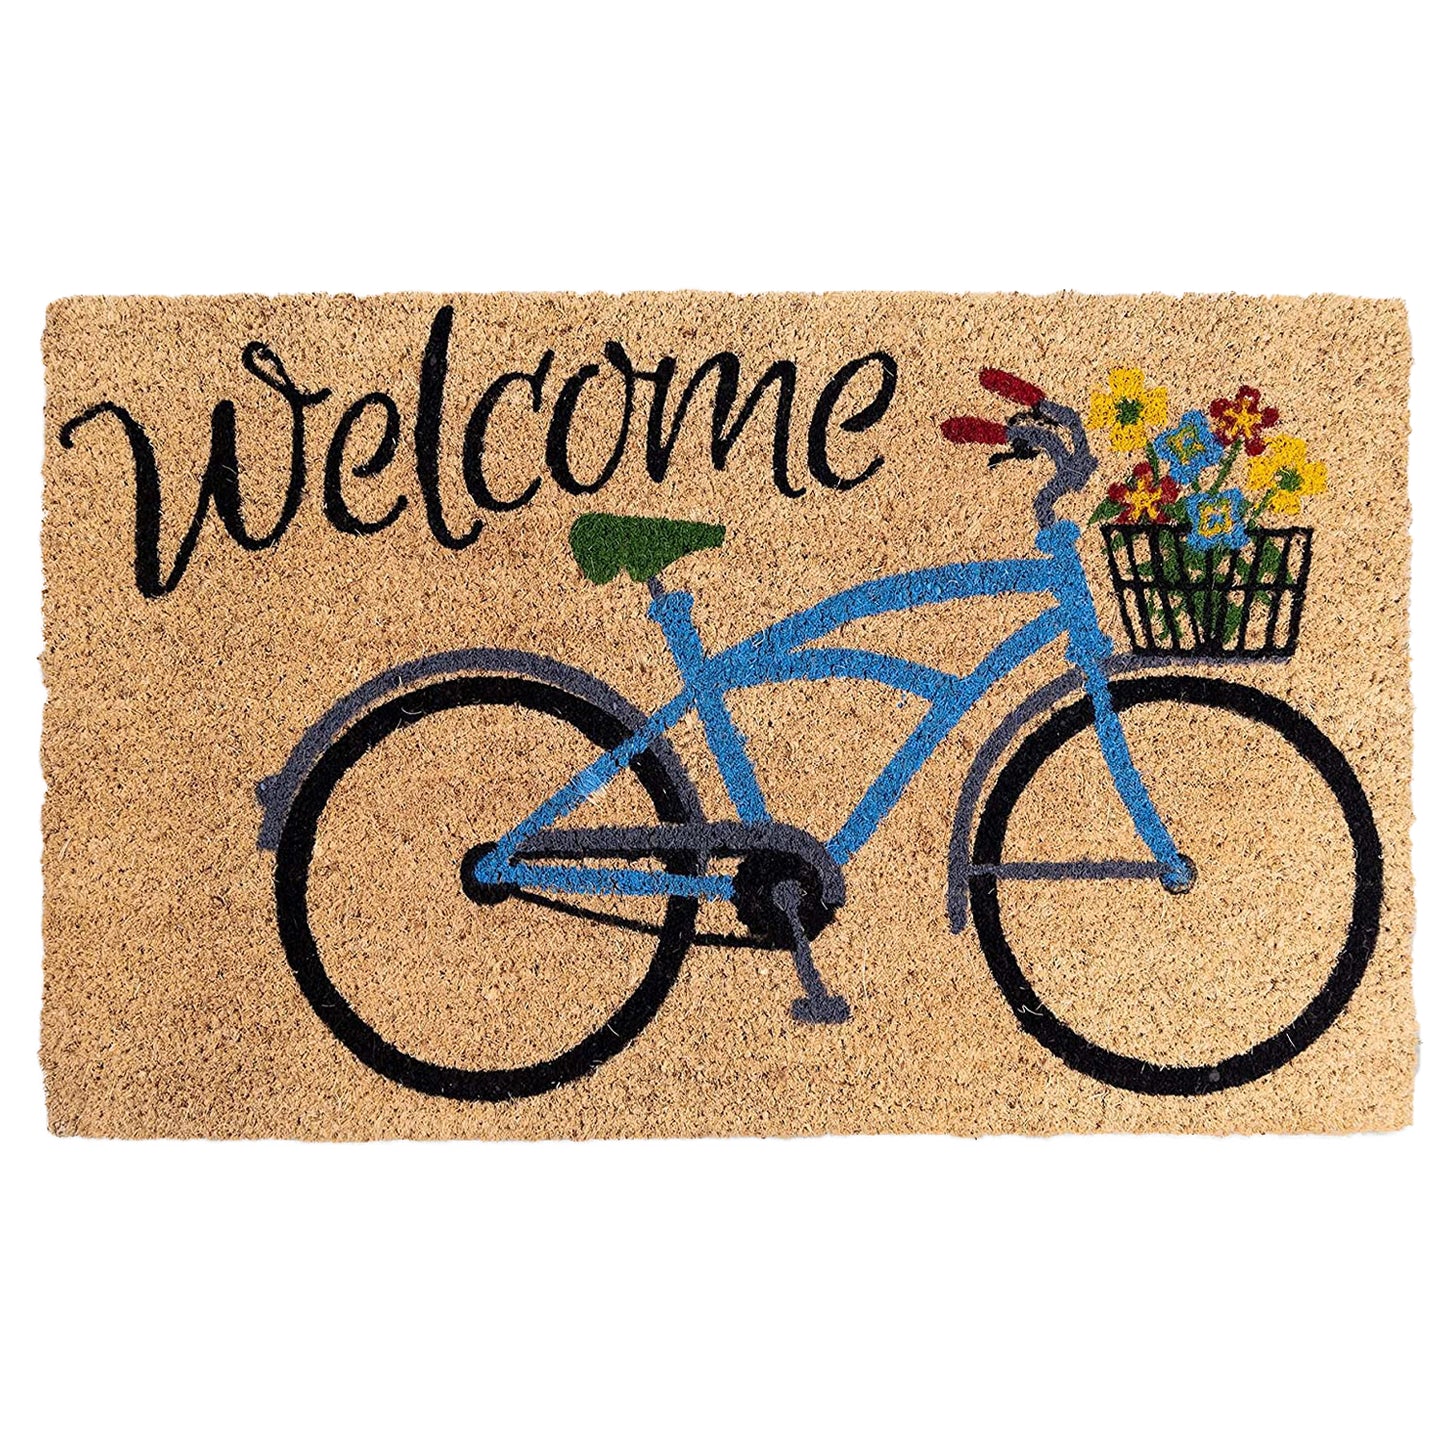 Avera Products "Welcome" Bike with Flowers Coir Doormat